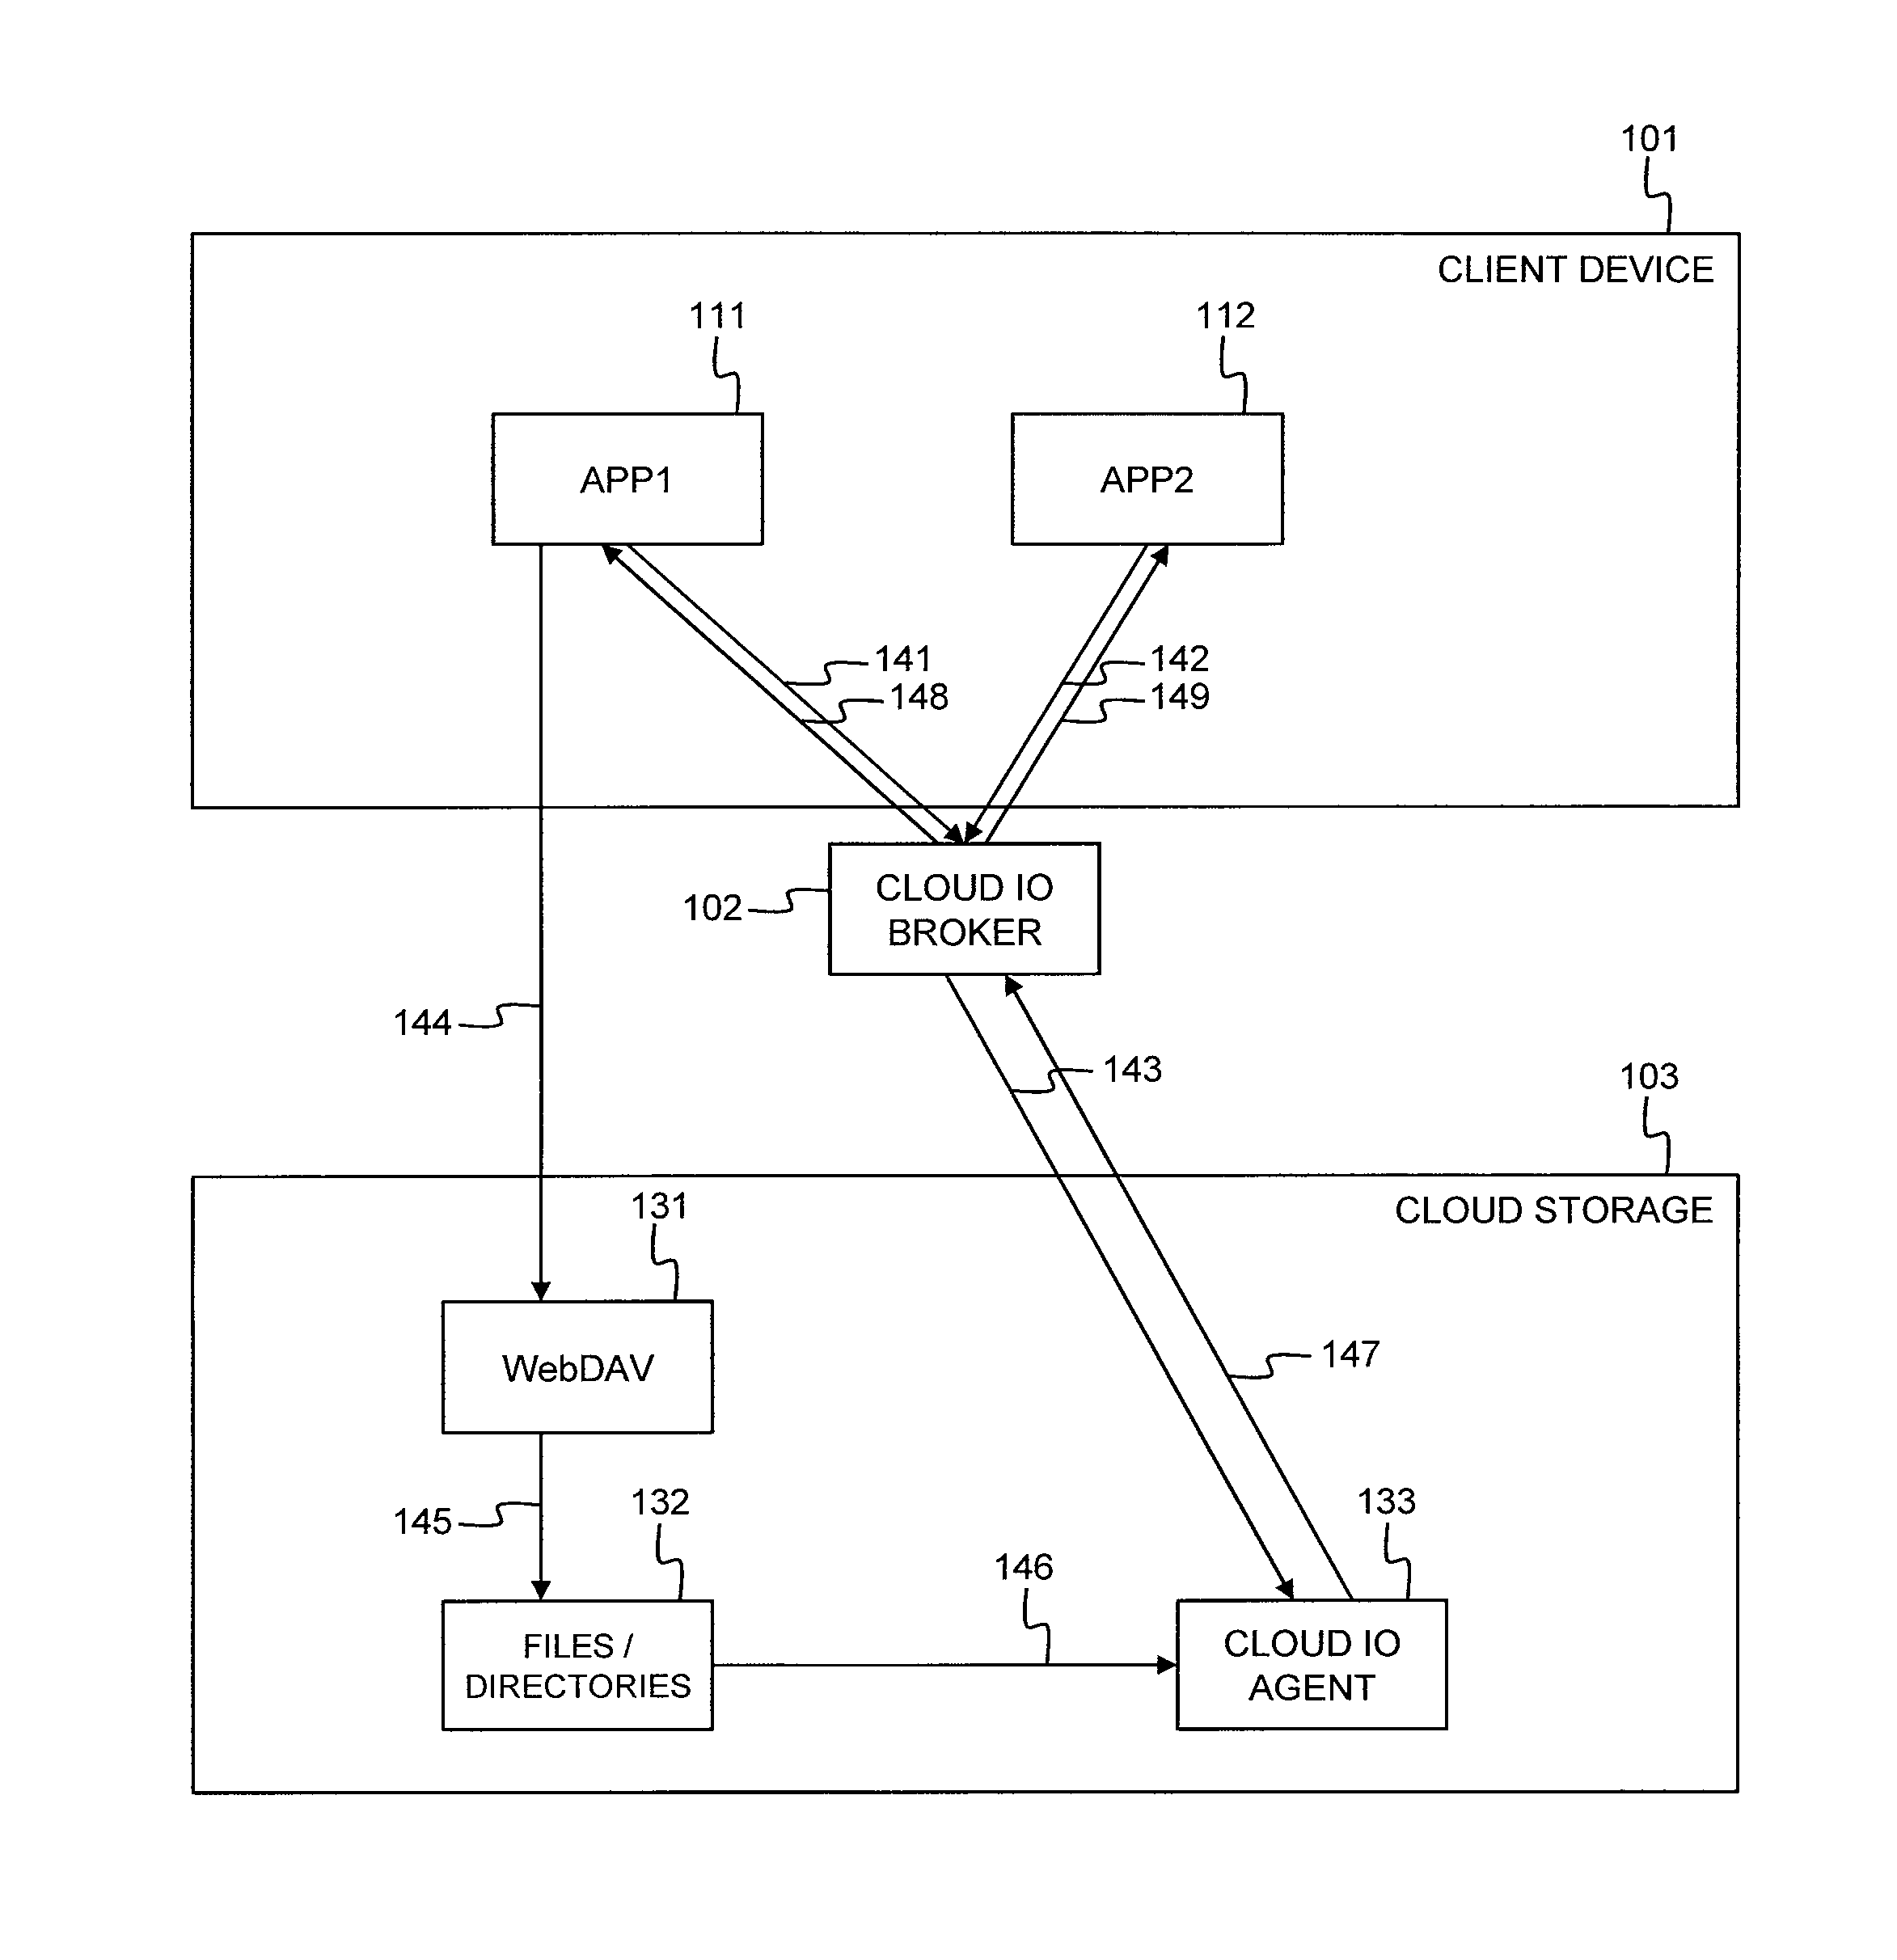 Method for content change notification in a cloud storage system, a corresponding cloud broker and cloud agent